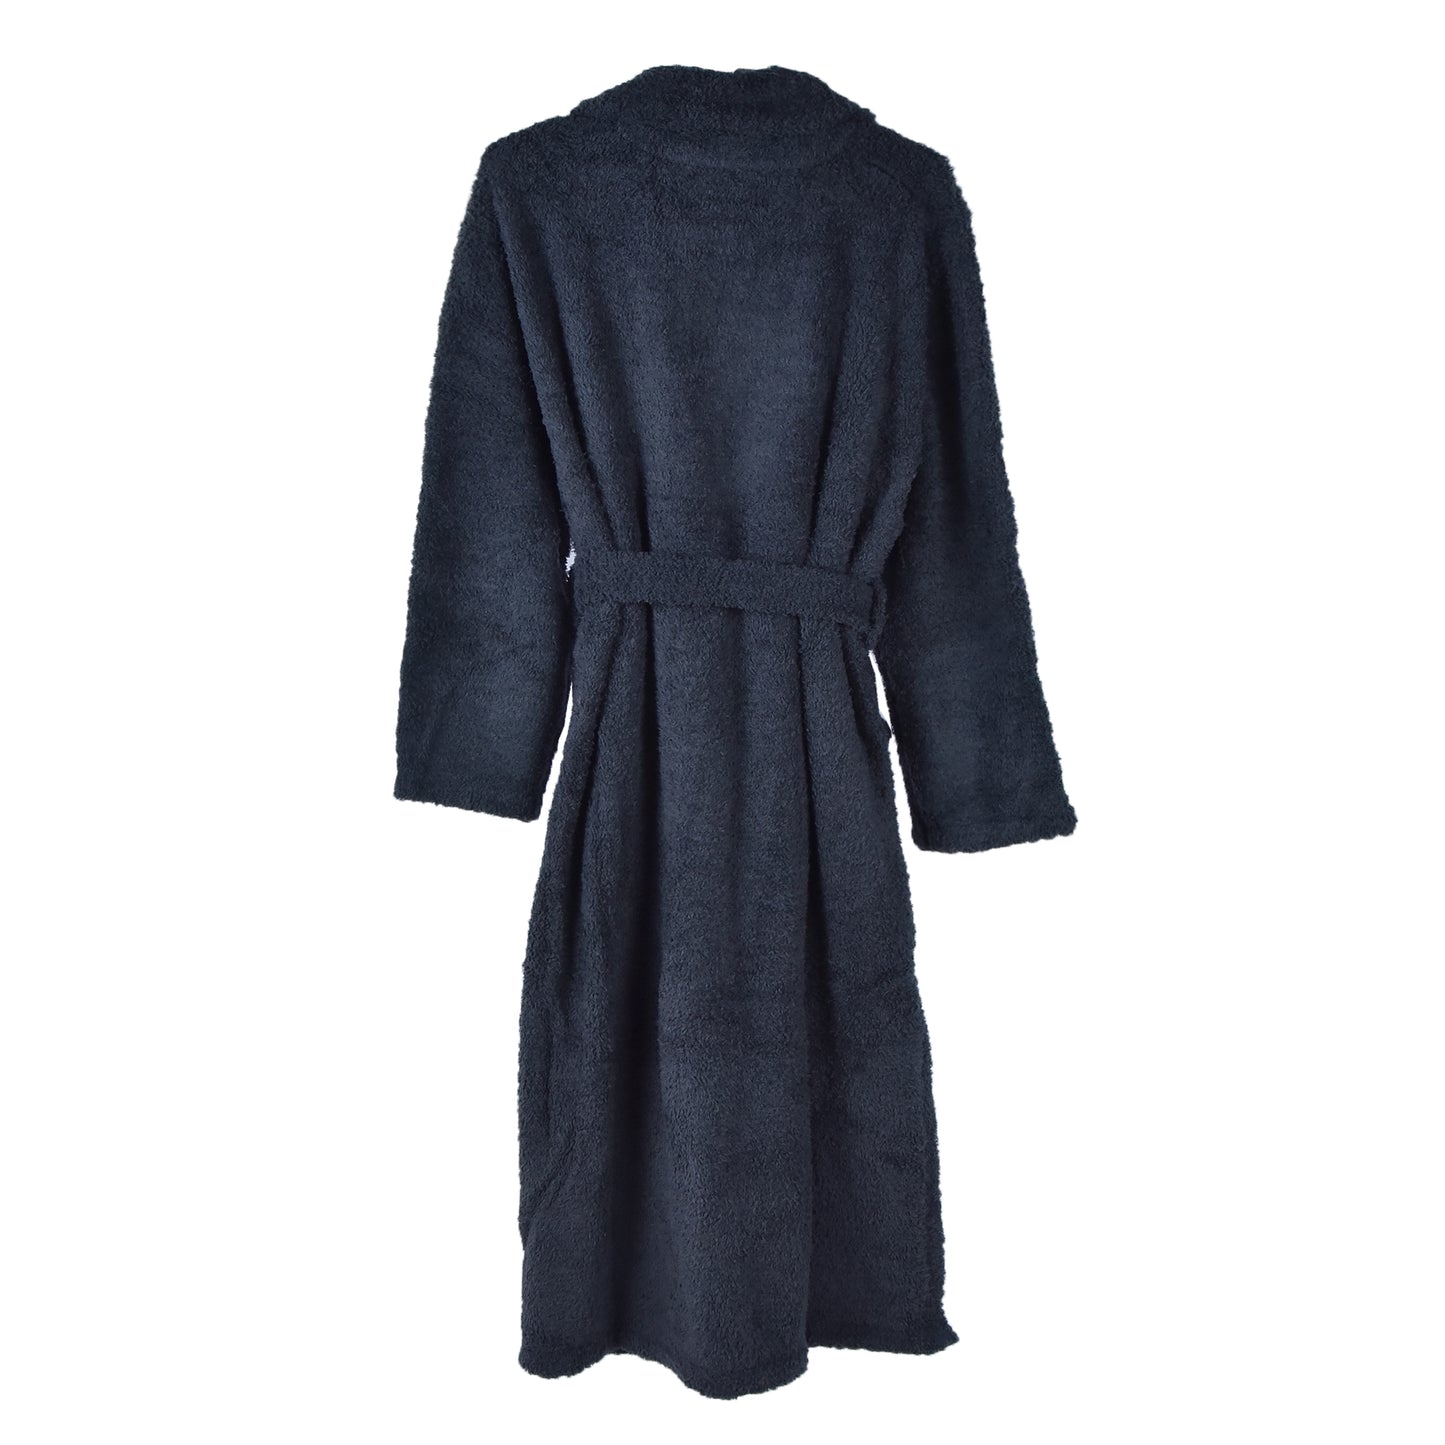 Barefoot Dreams -  Cozychic  Adult Robe - Carbon